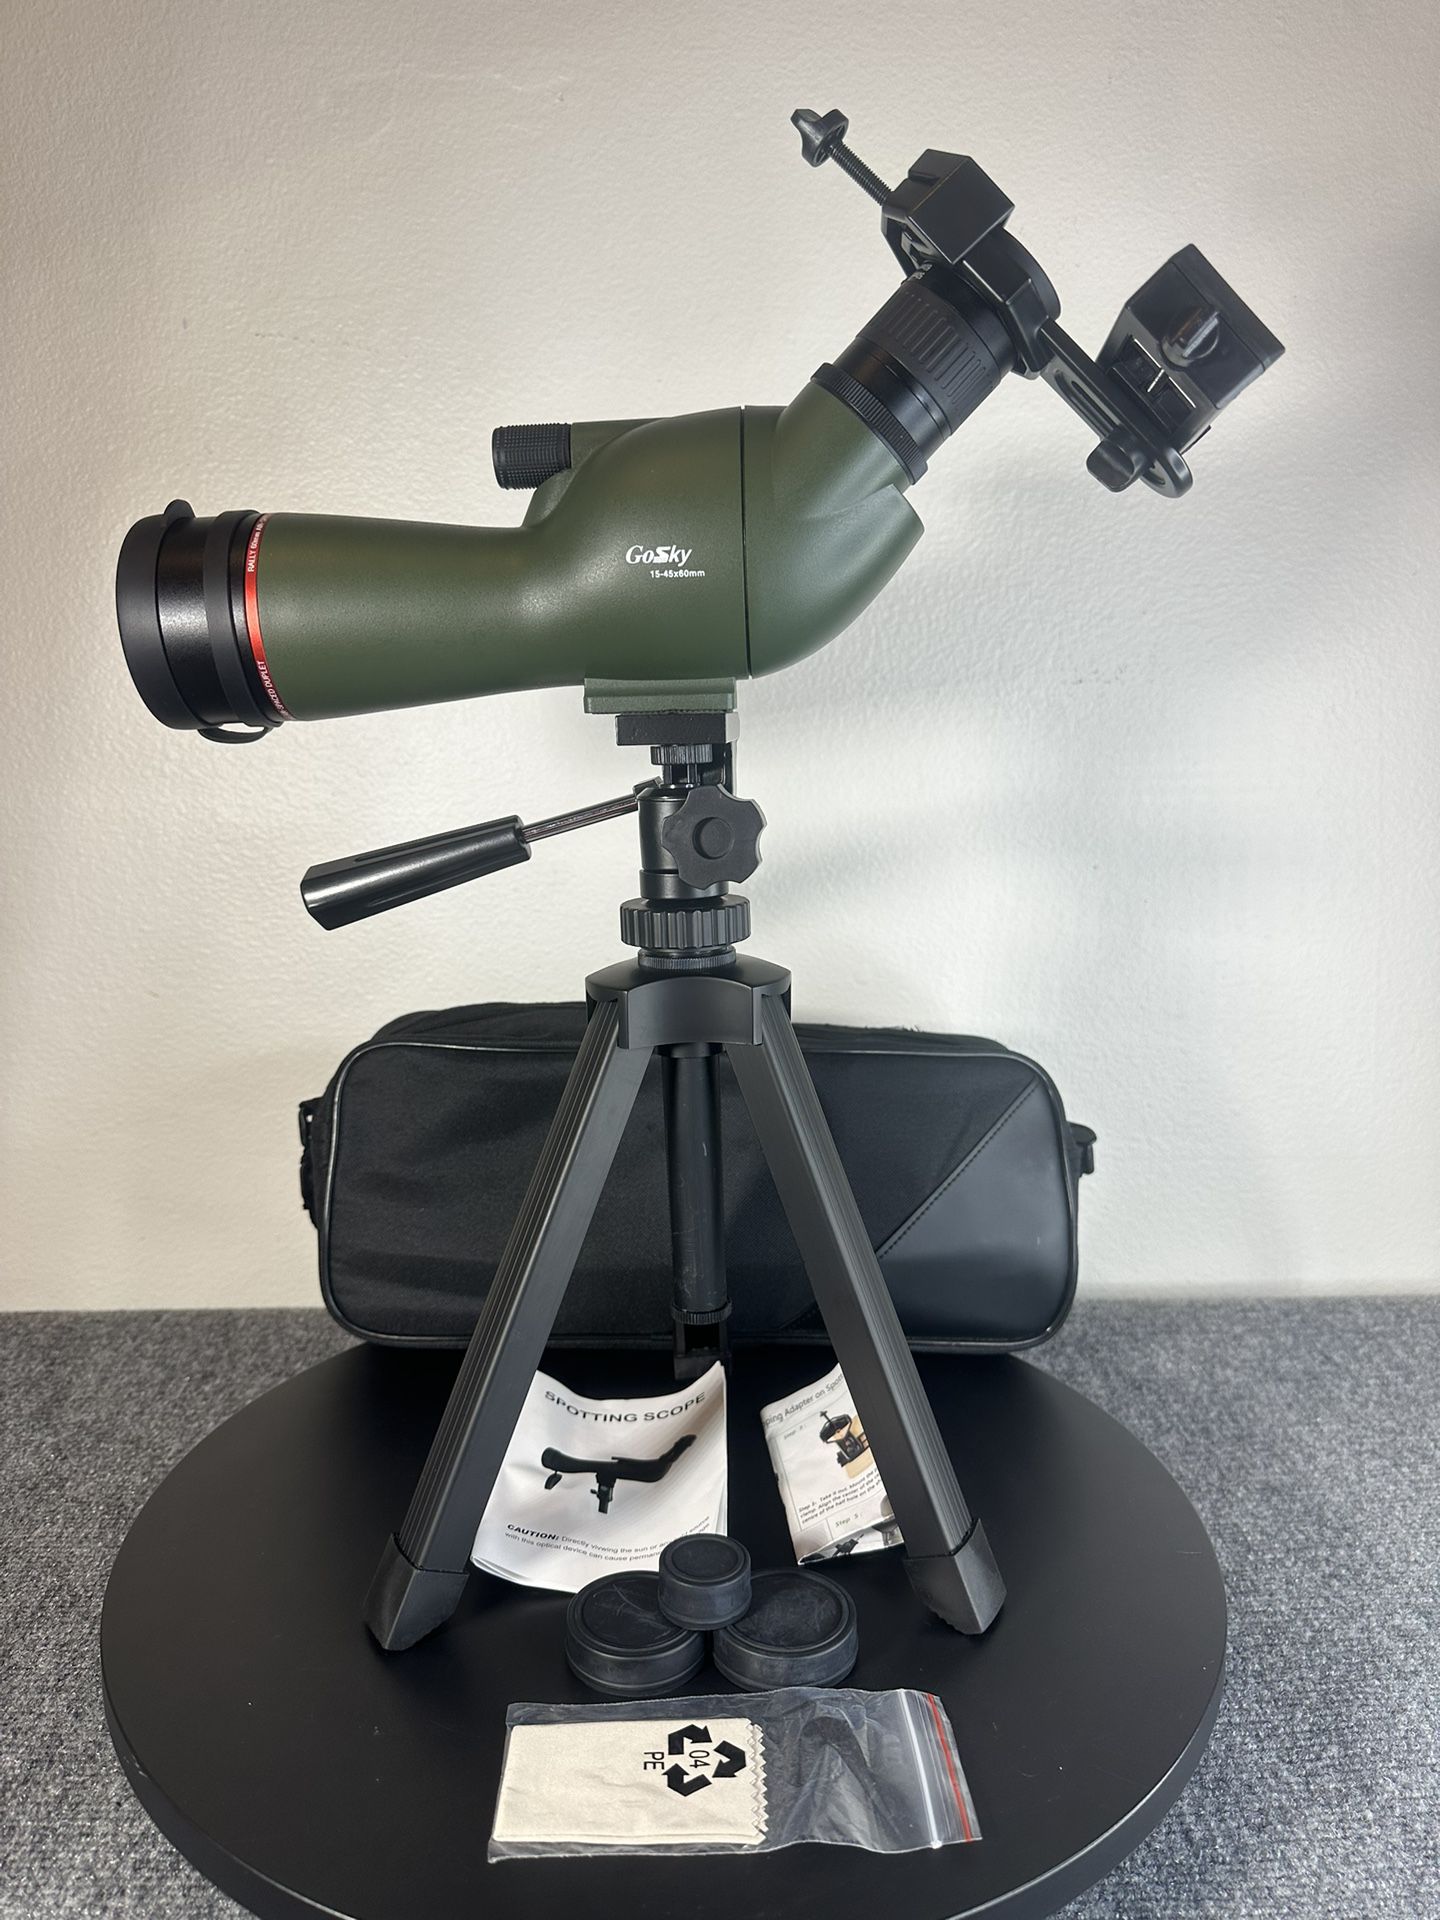 Gosky 15-45x60 mm Spotting Scope with Tripod, Carrying Bag & Phone View